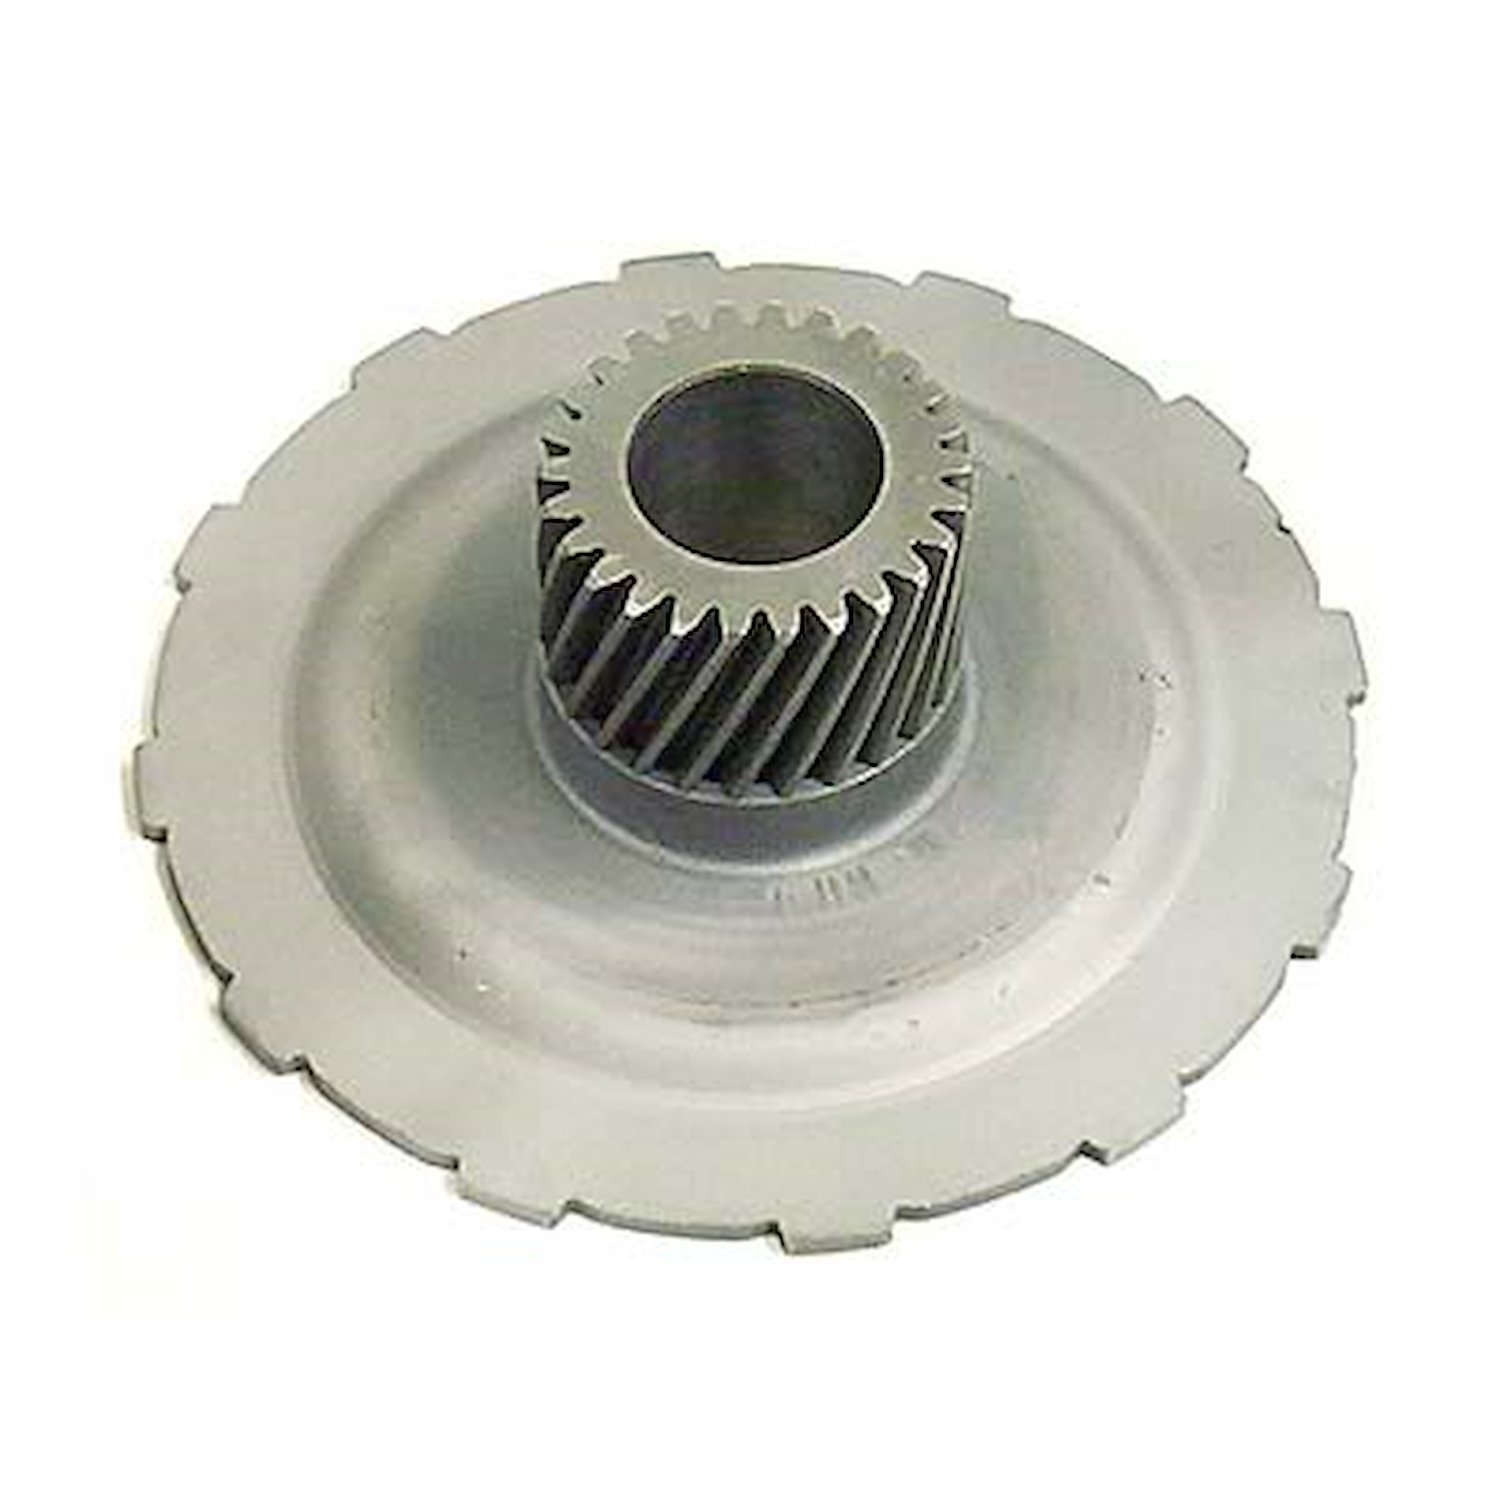 204030 Gear, With Flange - 1.76 - Helical - OEM - 16 DP